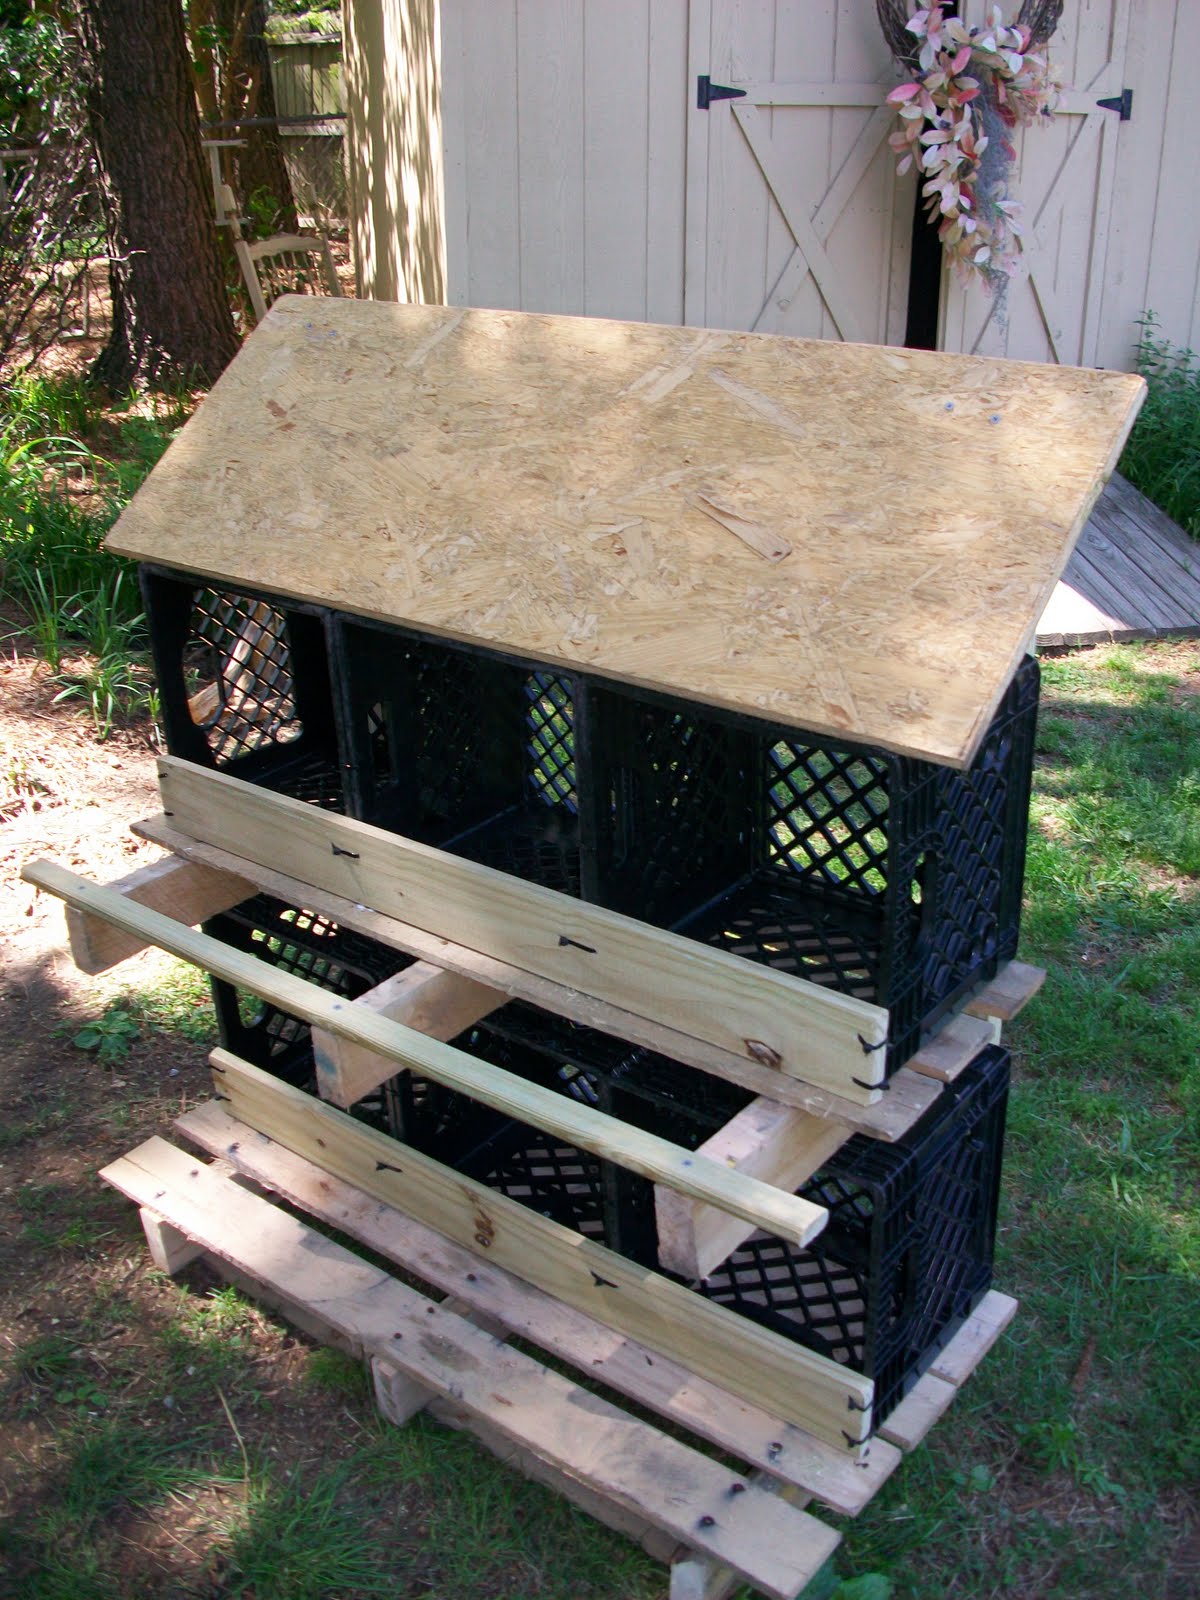 Create a Nesting Bbox Apartment Use Milk Crates And Recycled Shipping Pallets